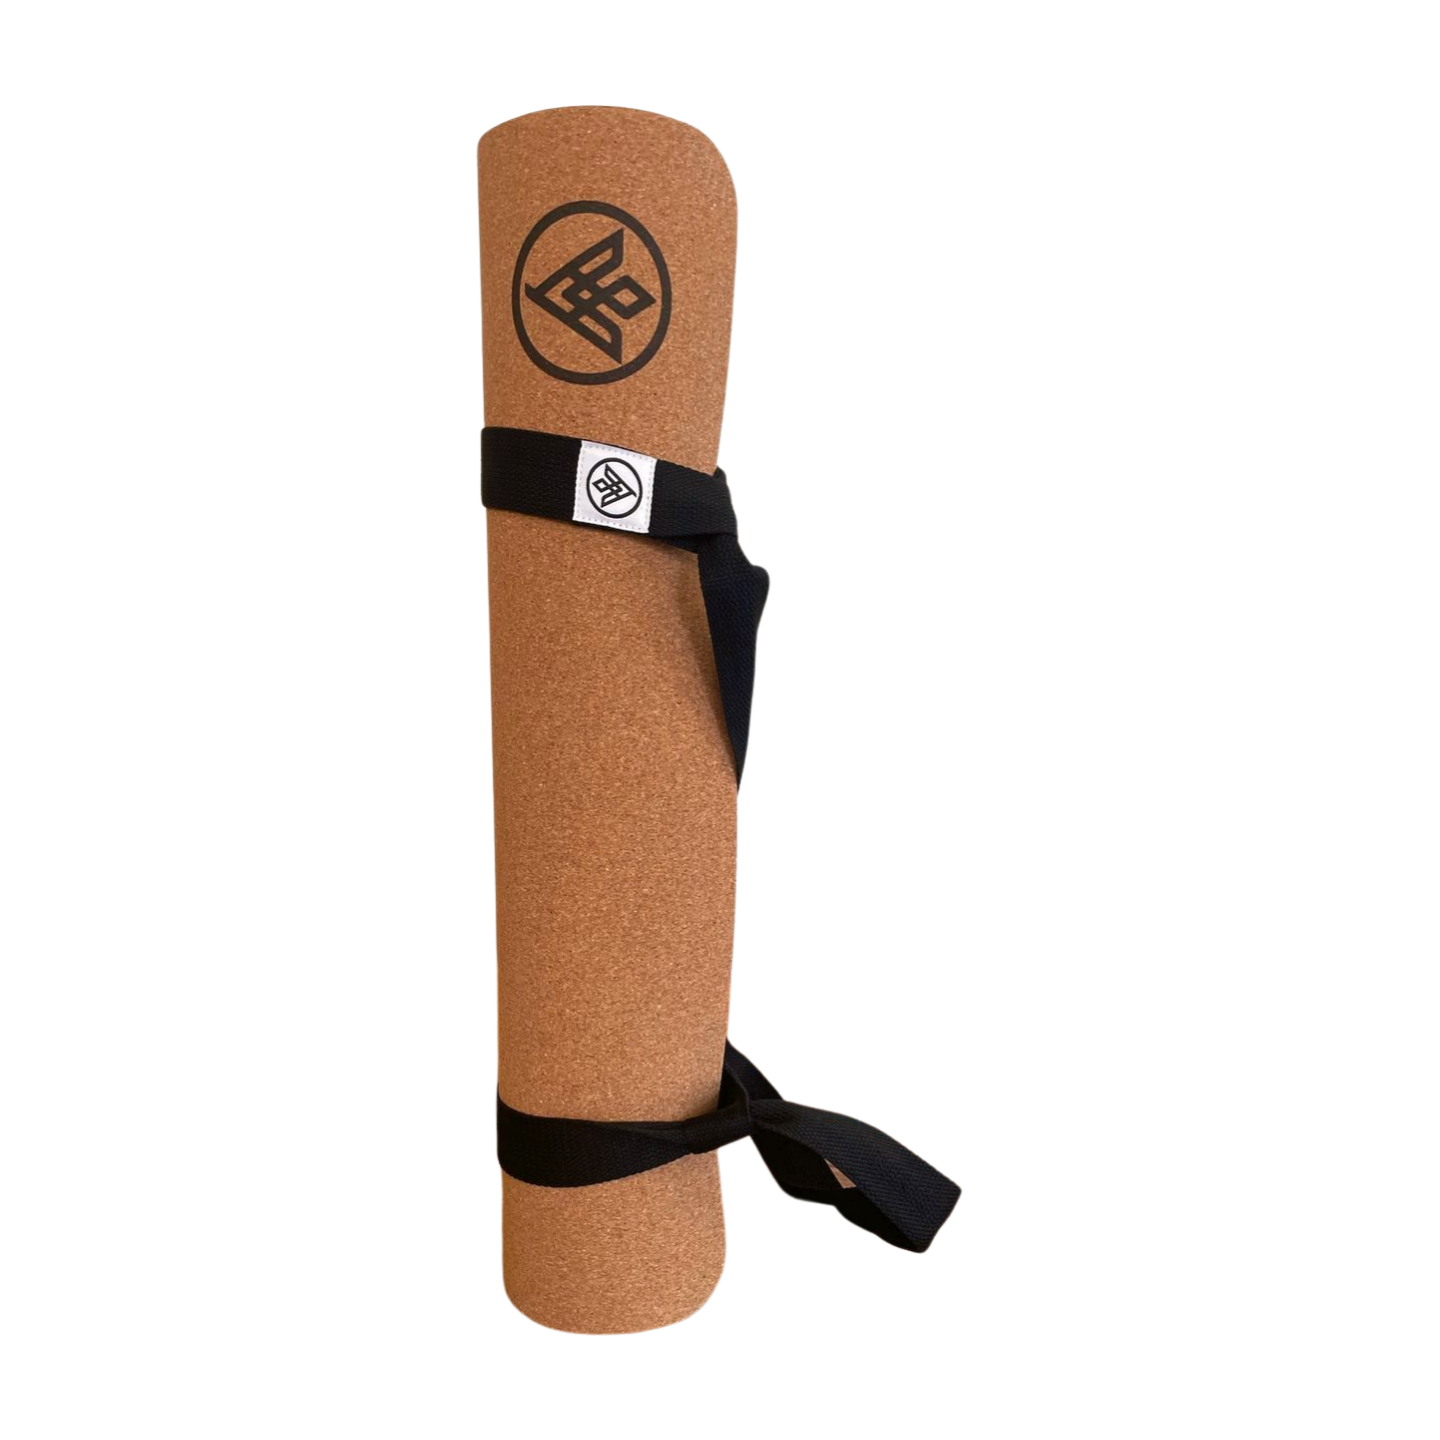 The 'Simple' Yoga Mat Carrying Strap by Asivana Yoga